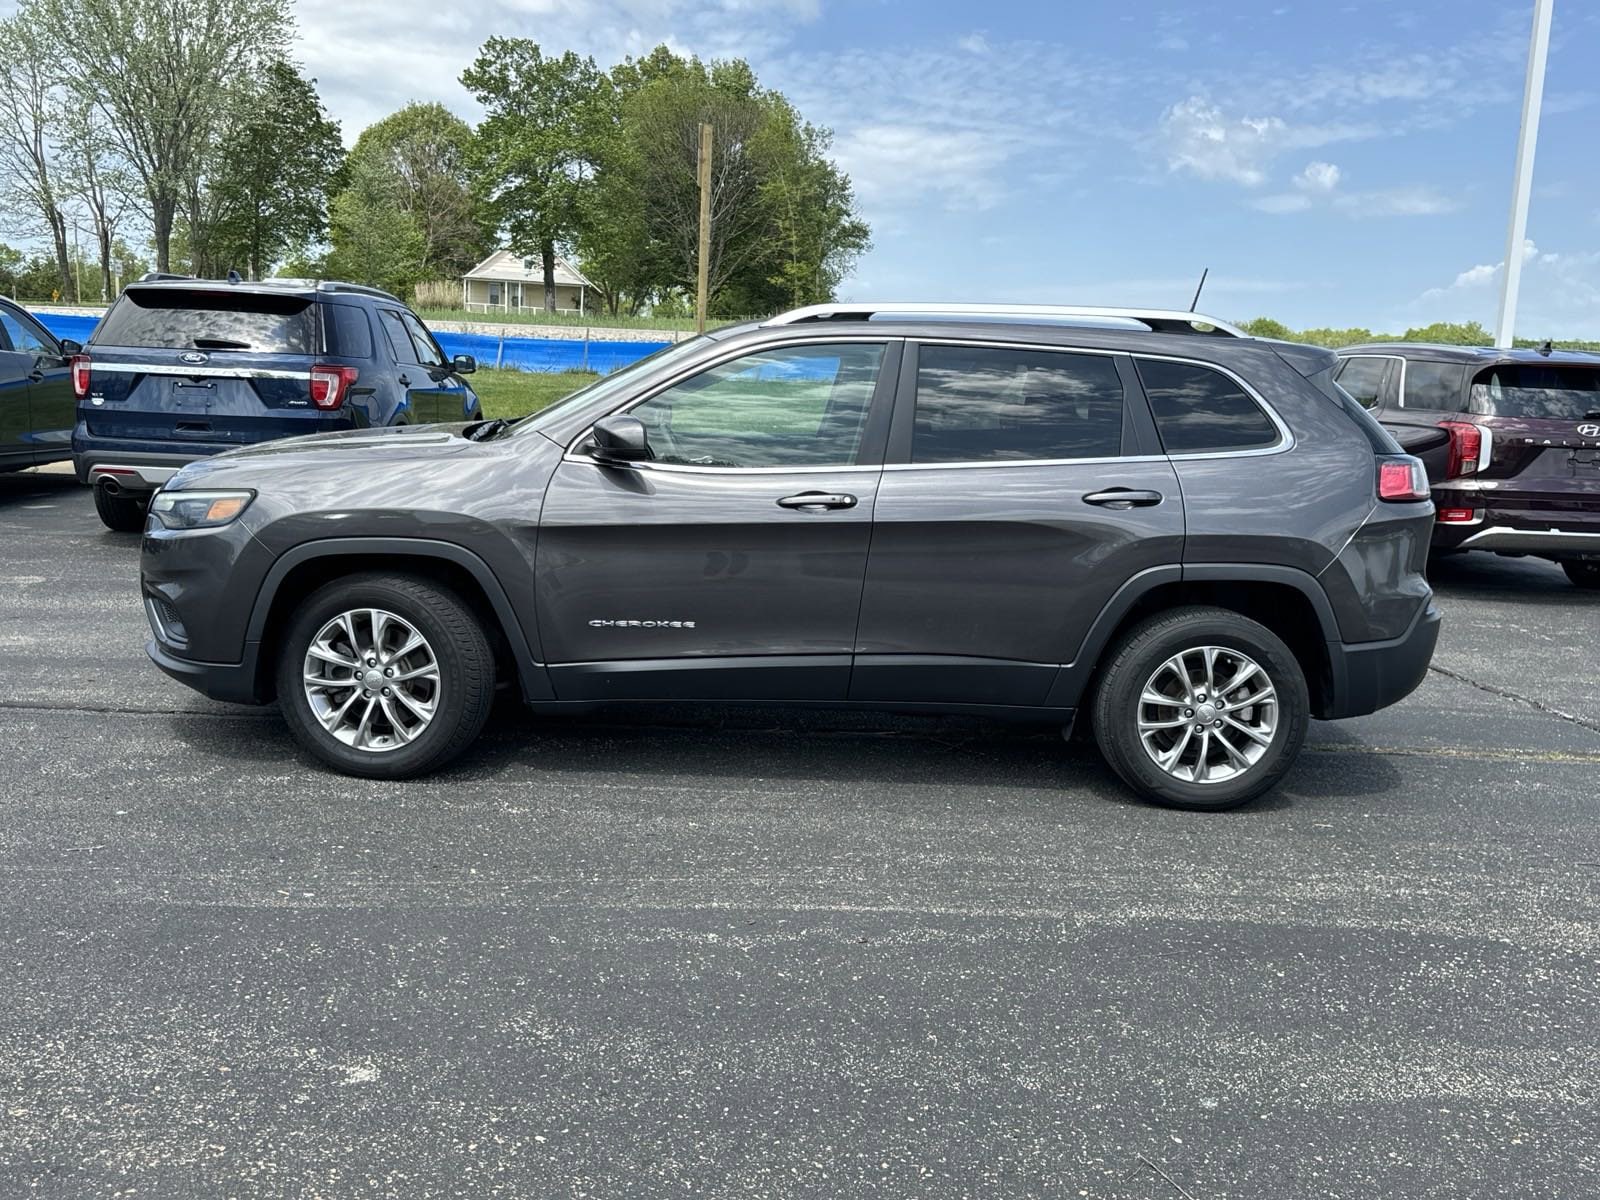 Used 2019 Jeep Cherokee Latitude Plus with VIN 1C4PJLLB6KD290041 for sale in Kansas City